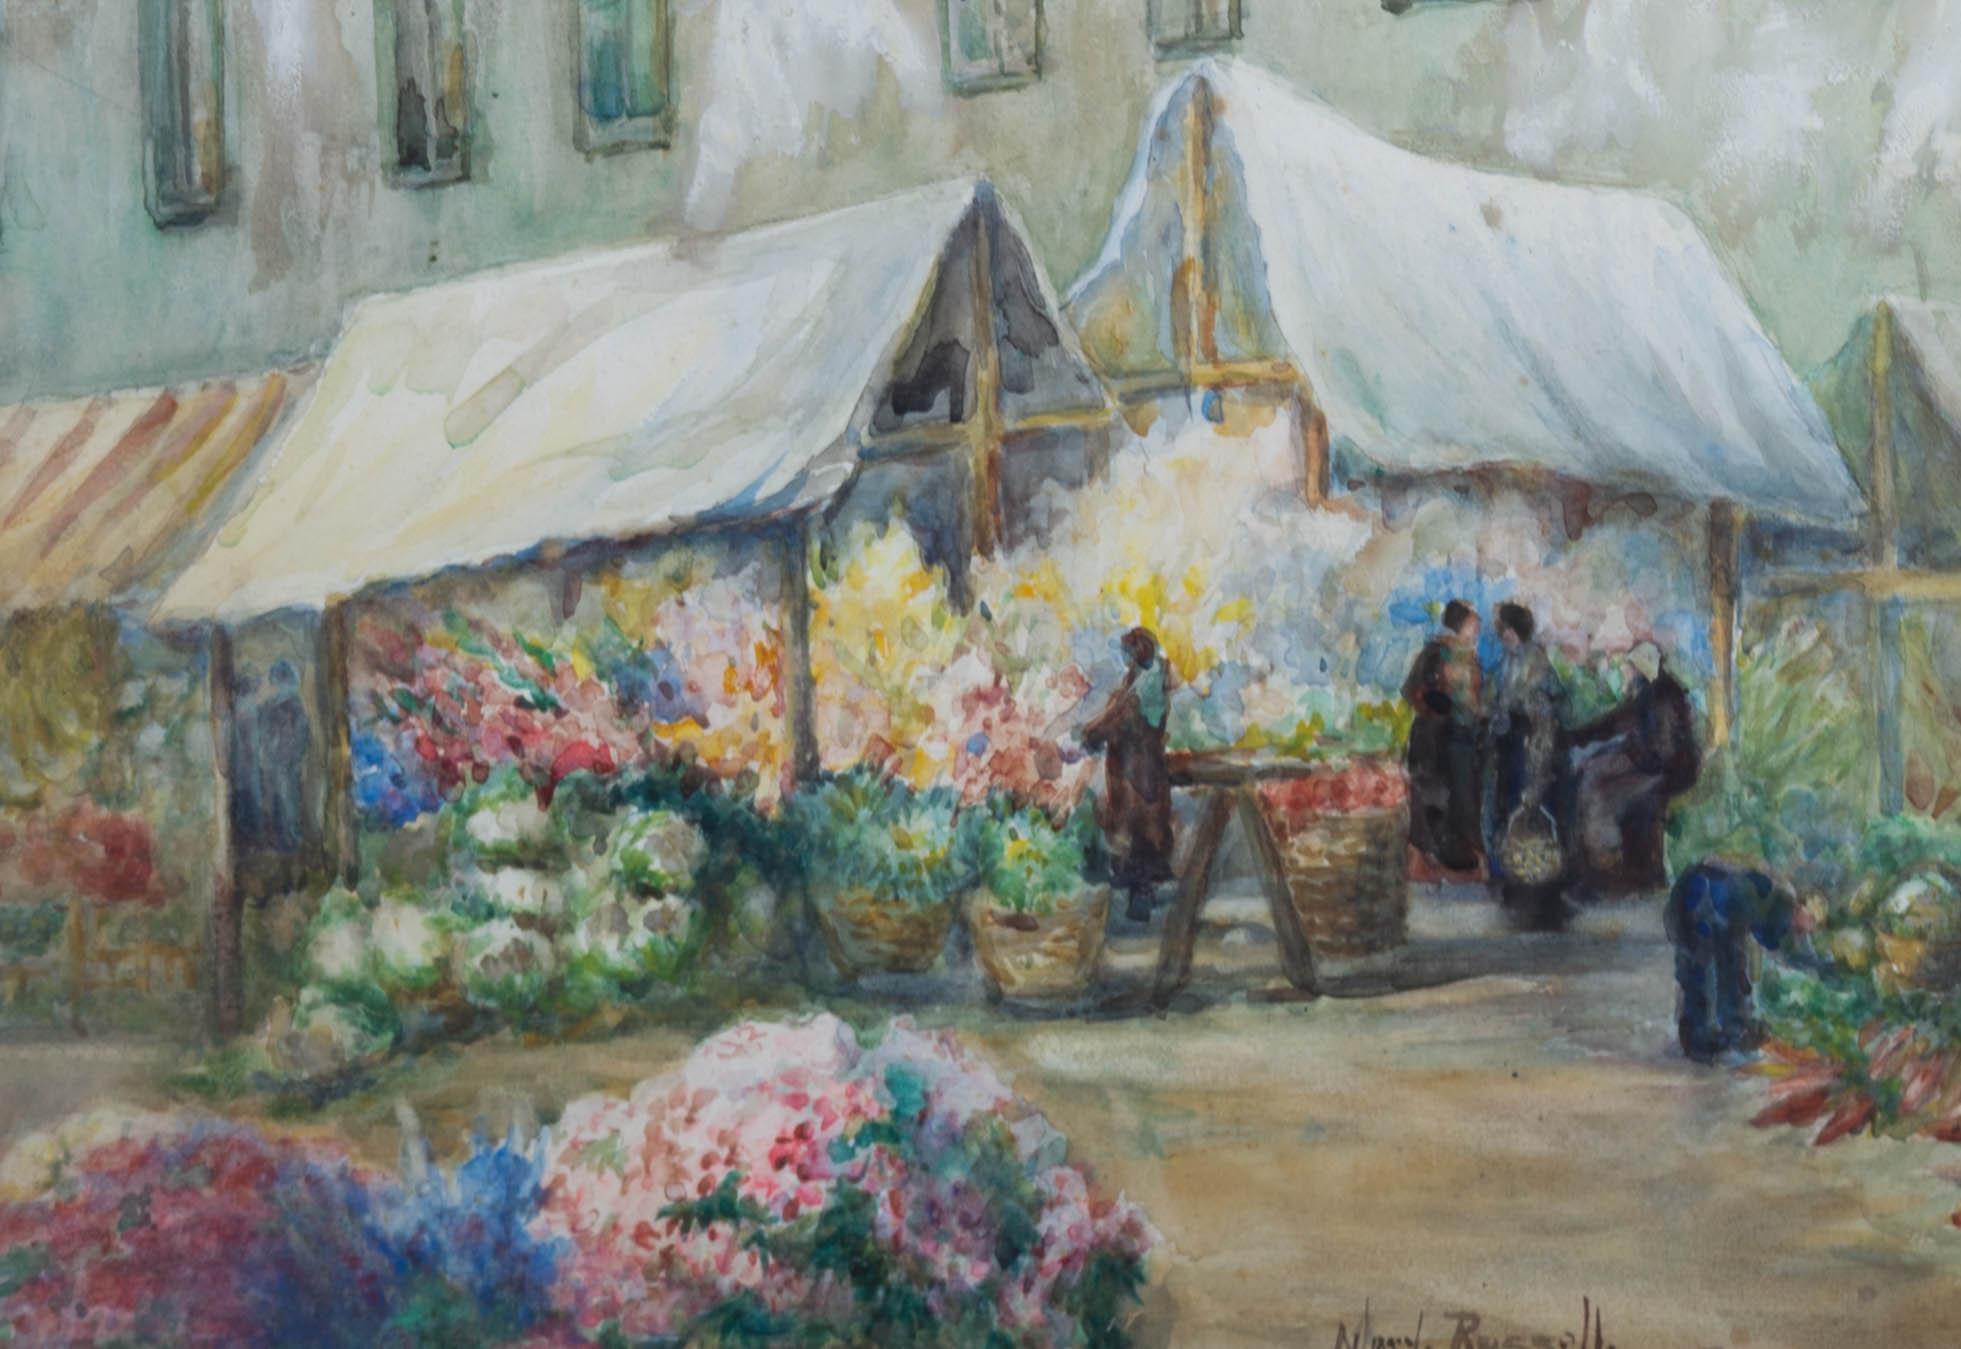 This charming watercolour scene depicts a vibrant flower market in Dieppe, France. Figures with large baskets browse the selection of bright flowers on the narrow French Street. Painted in an impressionist style with soft watercolour hues. Label